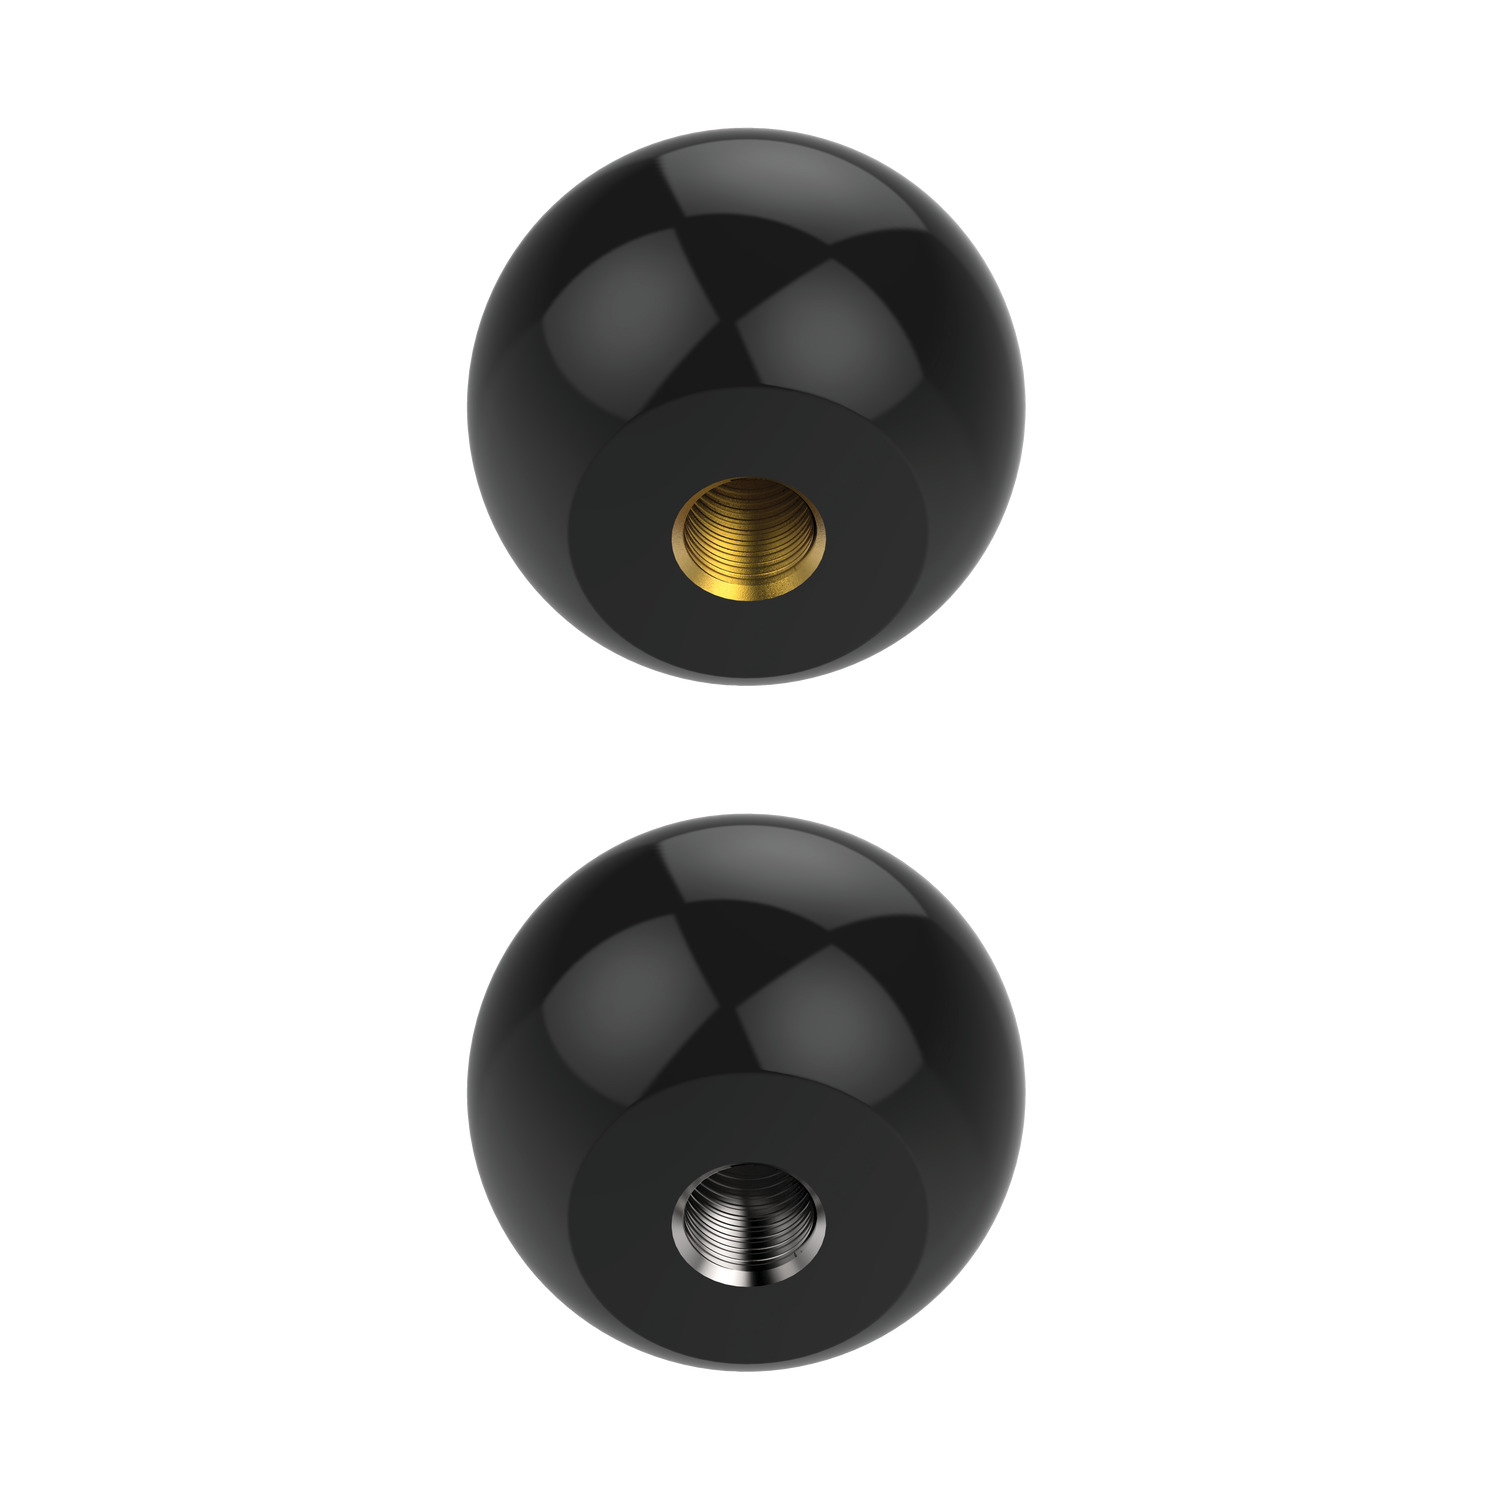 Ball Knobs - Plastic Plastic Ball Knobs made from duroplast (DIN 7708) to DIN 319. Available with either moulded thread, threaded bush or taper bore fixtures.